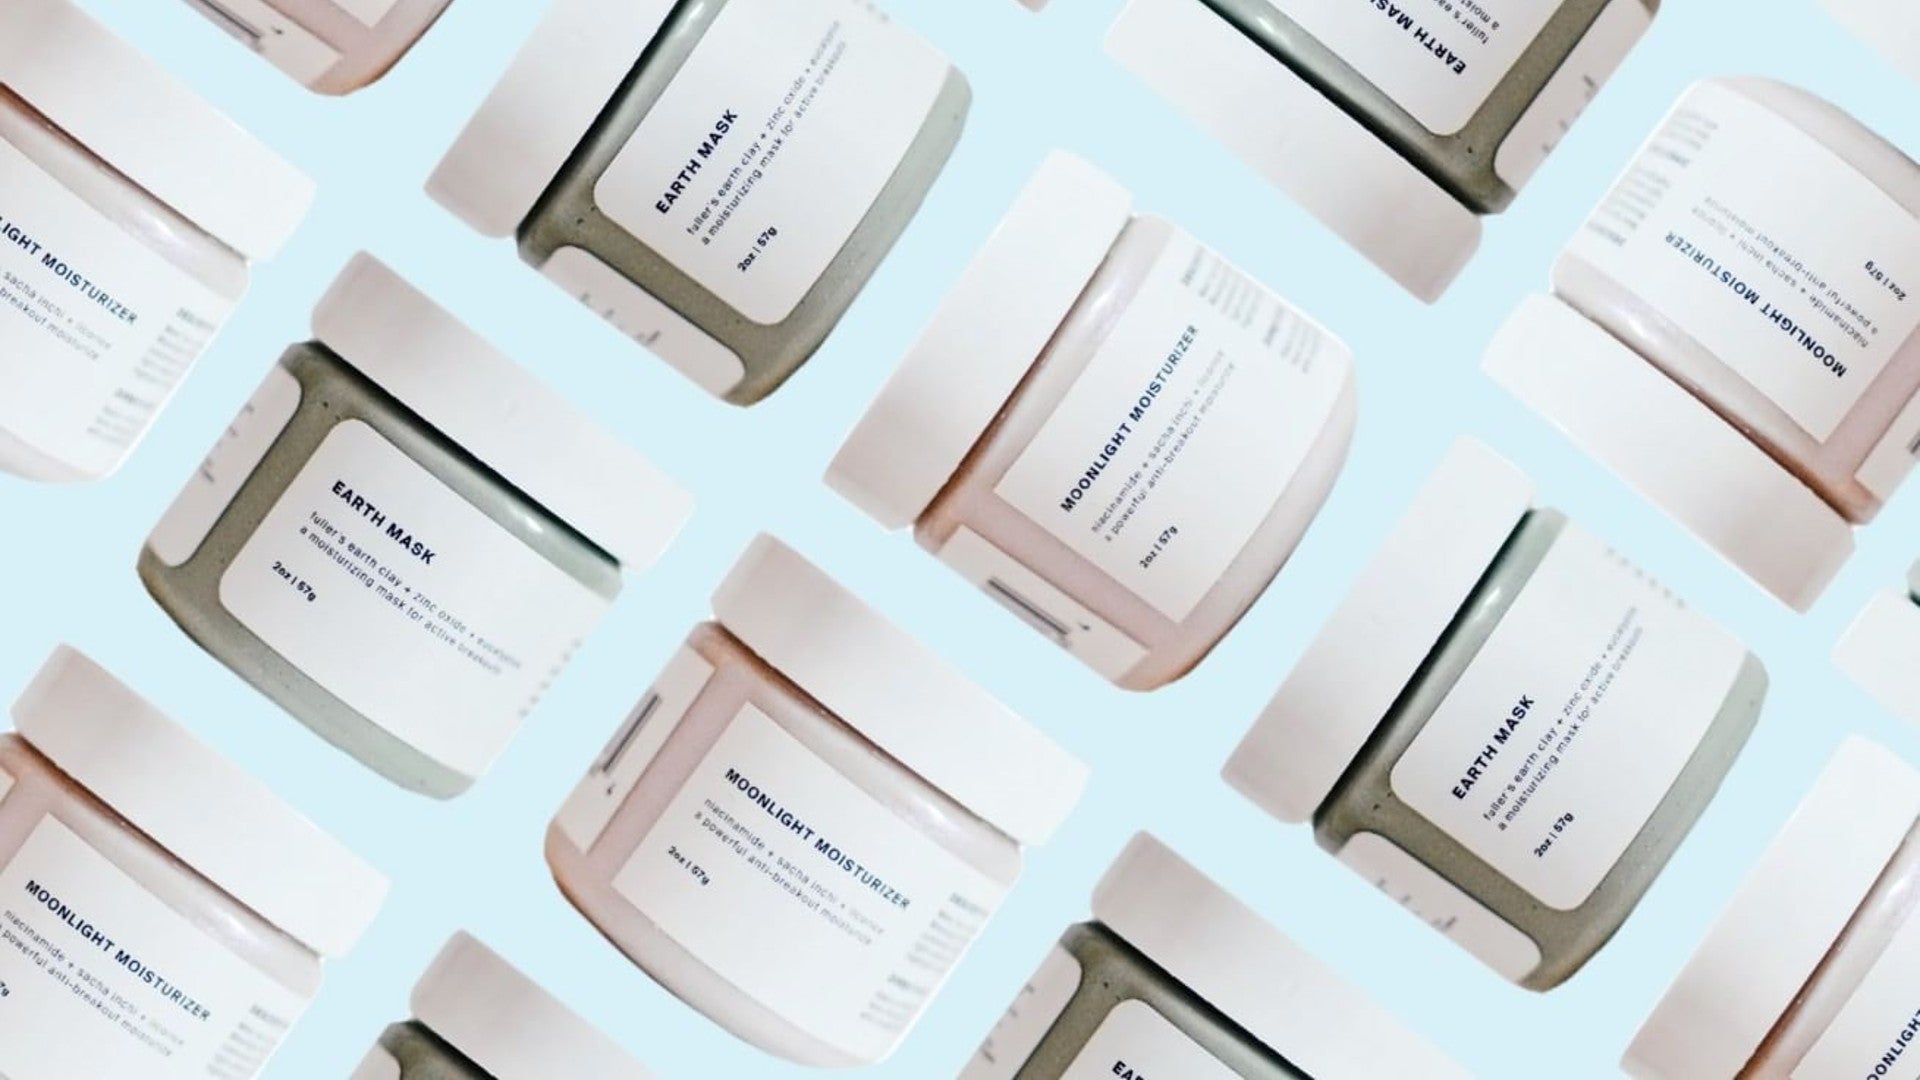 This Black-Owned Skin Care Brand Went From A Dorm Room To Urban Outfitters